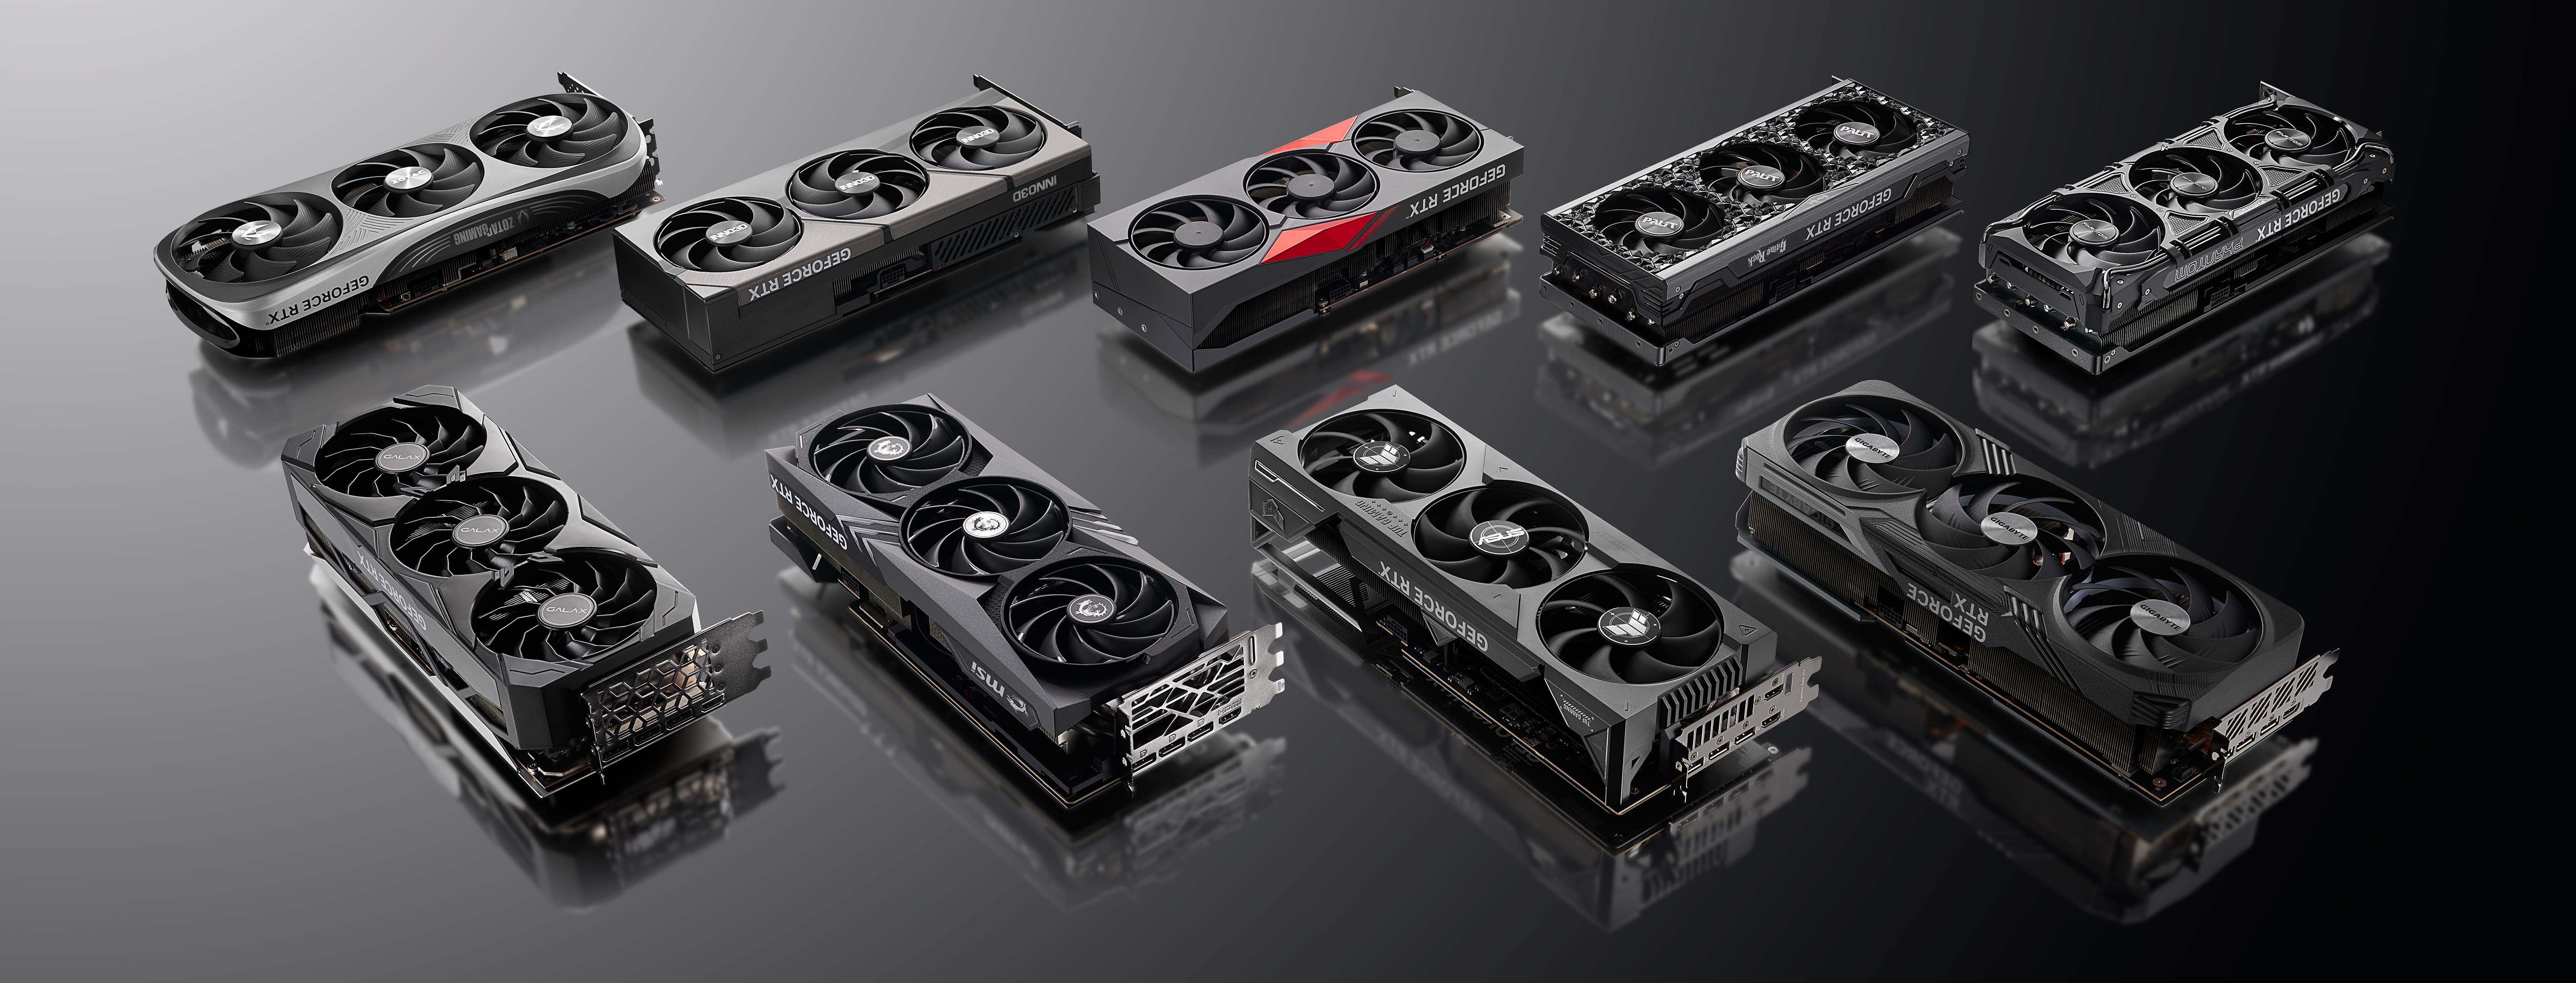 Nvidia 40-series GPUs from third-party vendors